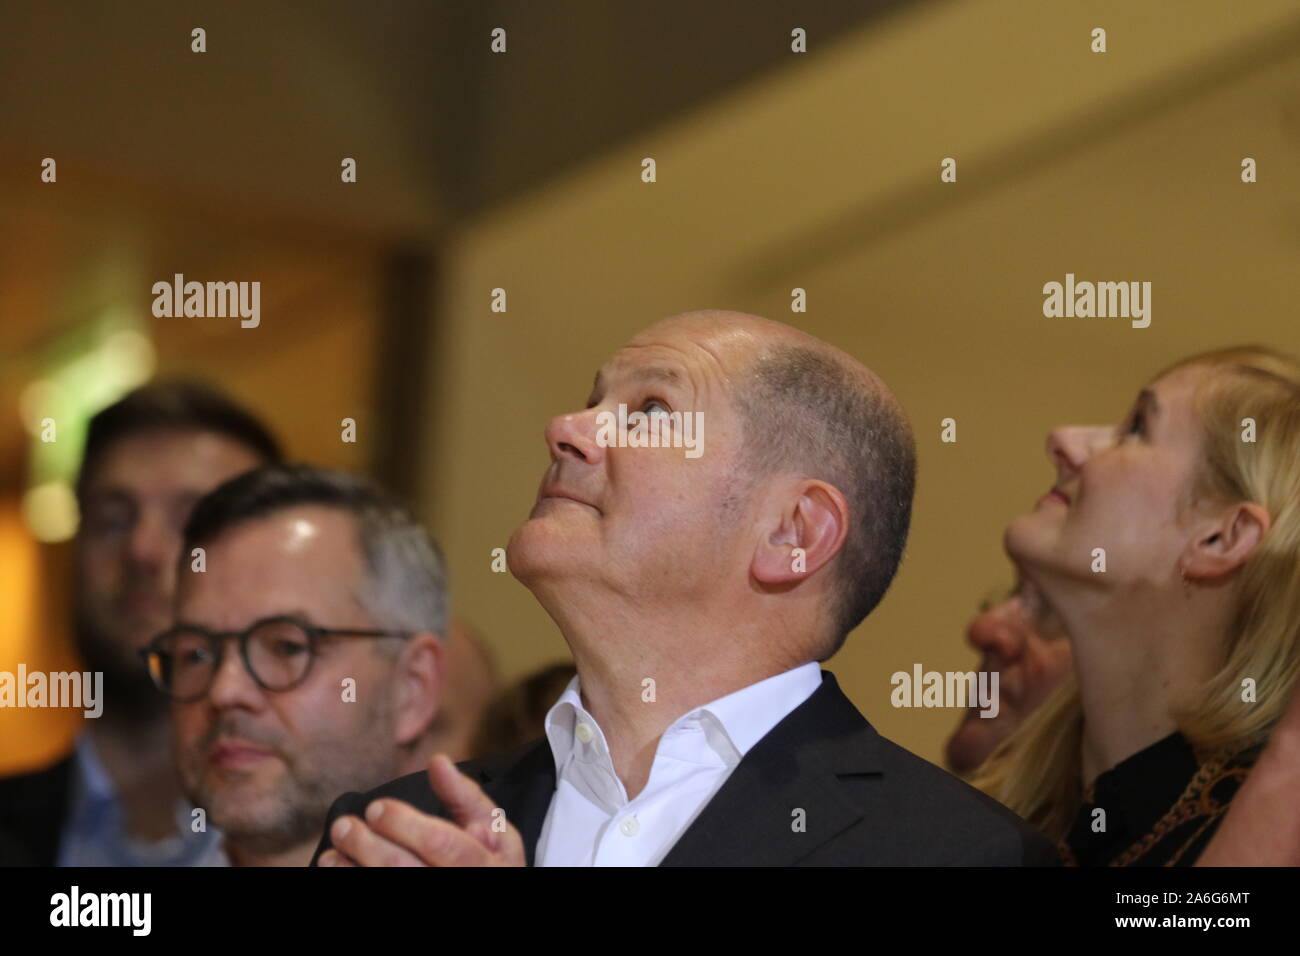 Germany, Berlin, 10/26/2019. Ditmar Nietan and Olaf Scholz in the SPD headquarters in Berlin. The SPD members elect Federal Finance Minister Olaf Scholz and Klara Geywitz just ahead of Norbert Walter-Borjans and Saskia Esken for the SPD presidency. The race for the SPD presidency goes into the runoff election in November: the two candidates will then be elected at the party congress. Stock Photo